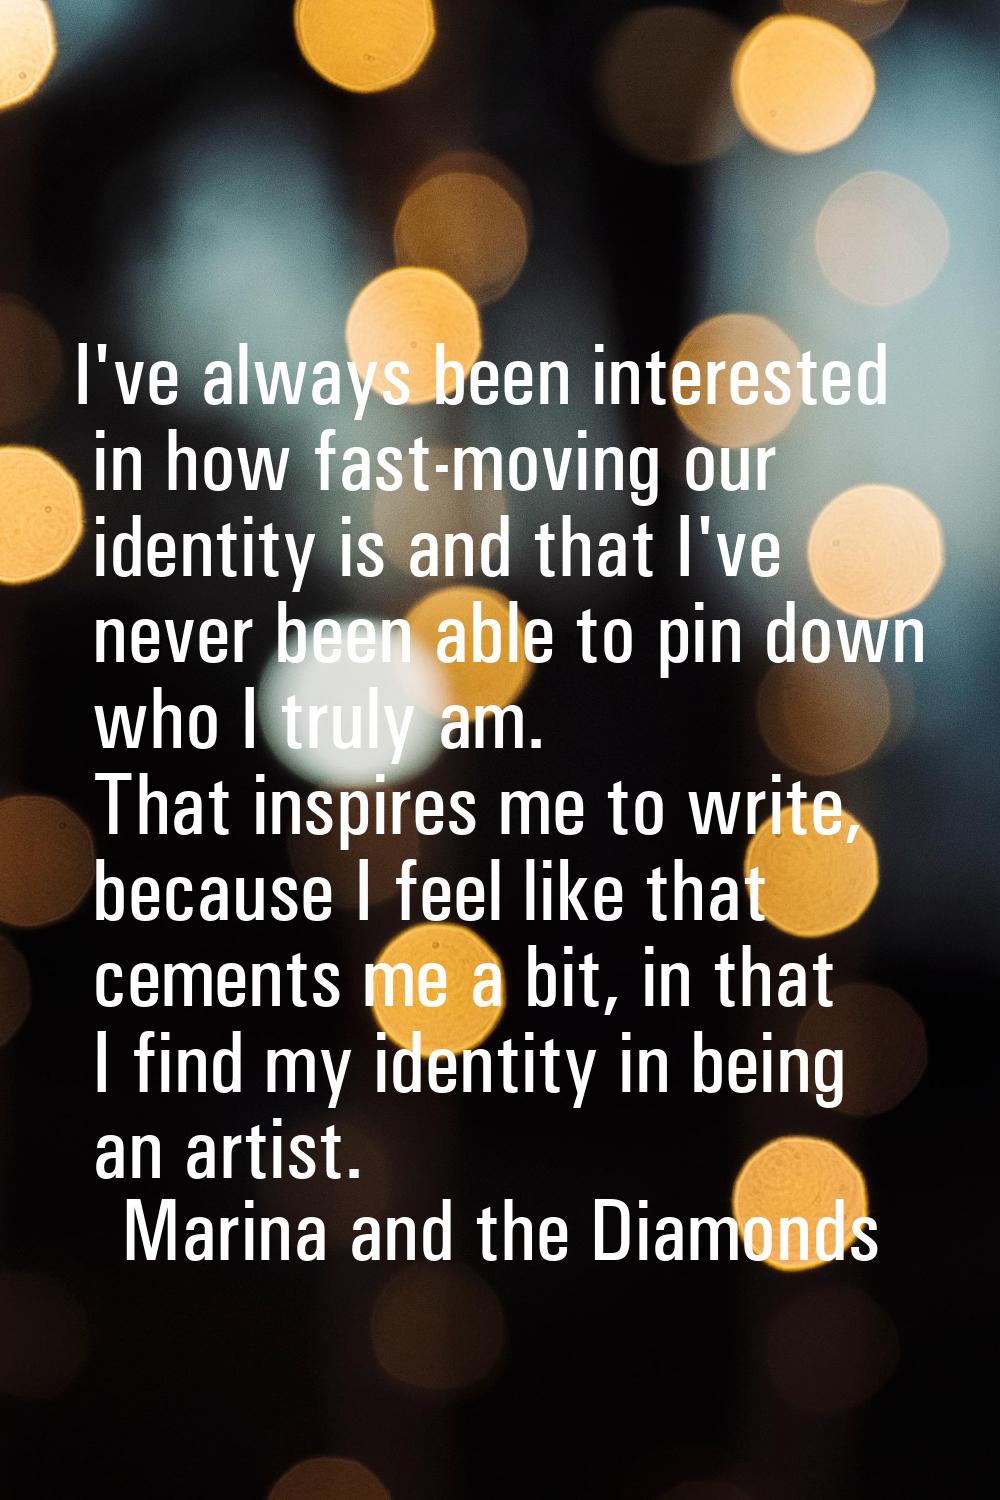 I've always been interested in how fast-moving our identity is and that I've never been able to pin